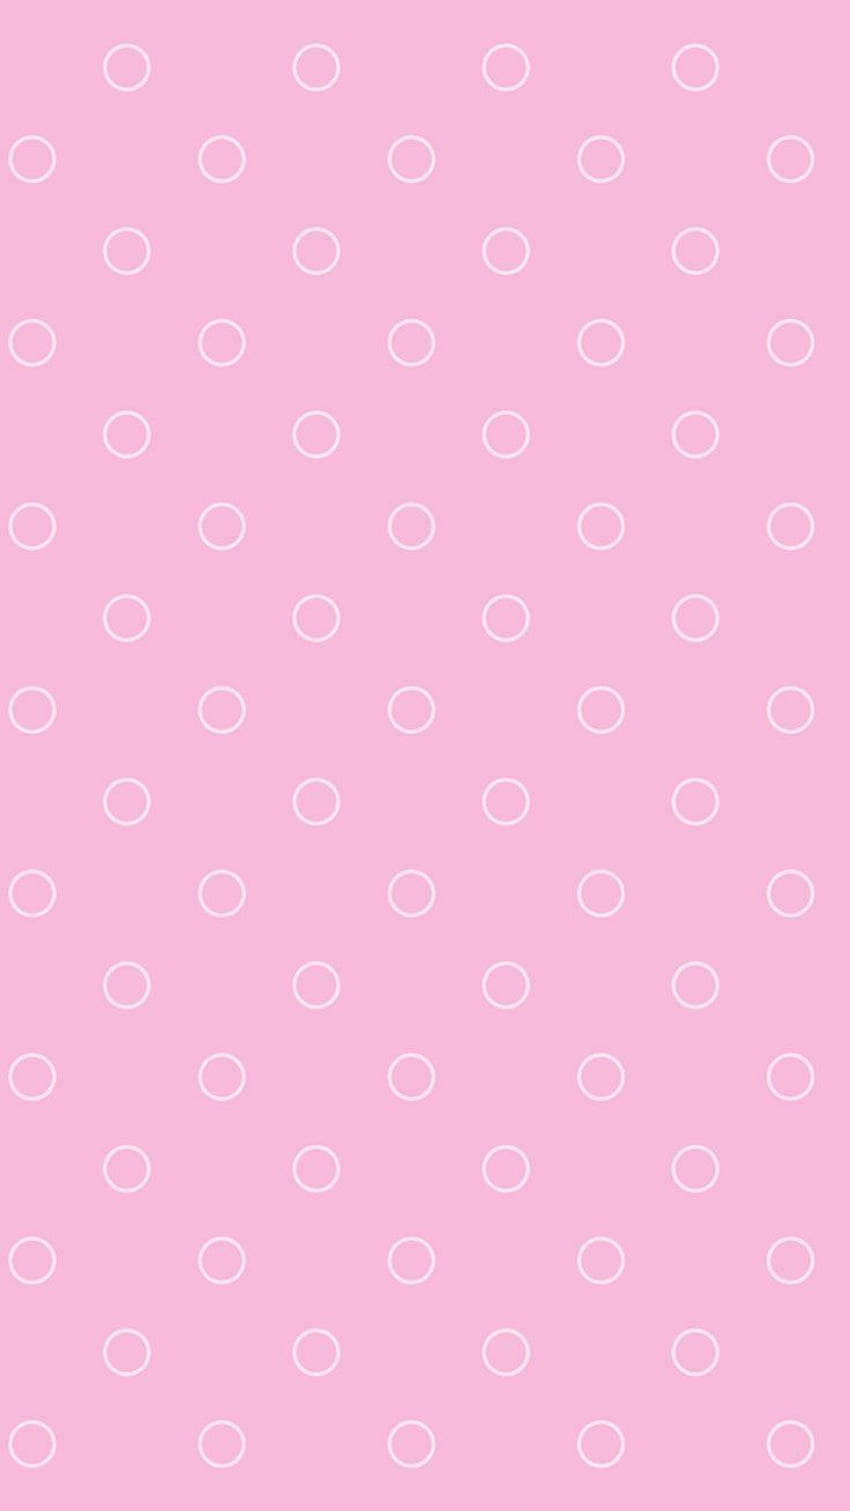 Pretty Pink iPhone 7 Plus . Preppy . Pink background, iPhone 7 plus , Pink iphone, Cute Apple iPhone 7 HD phone wallpaper